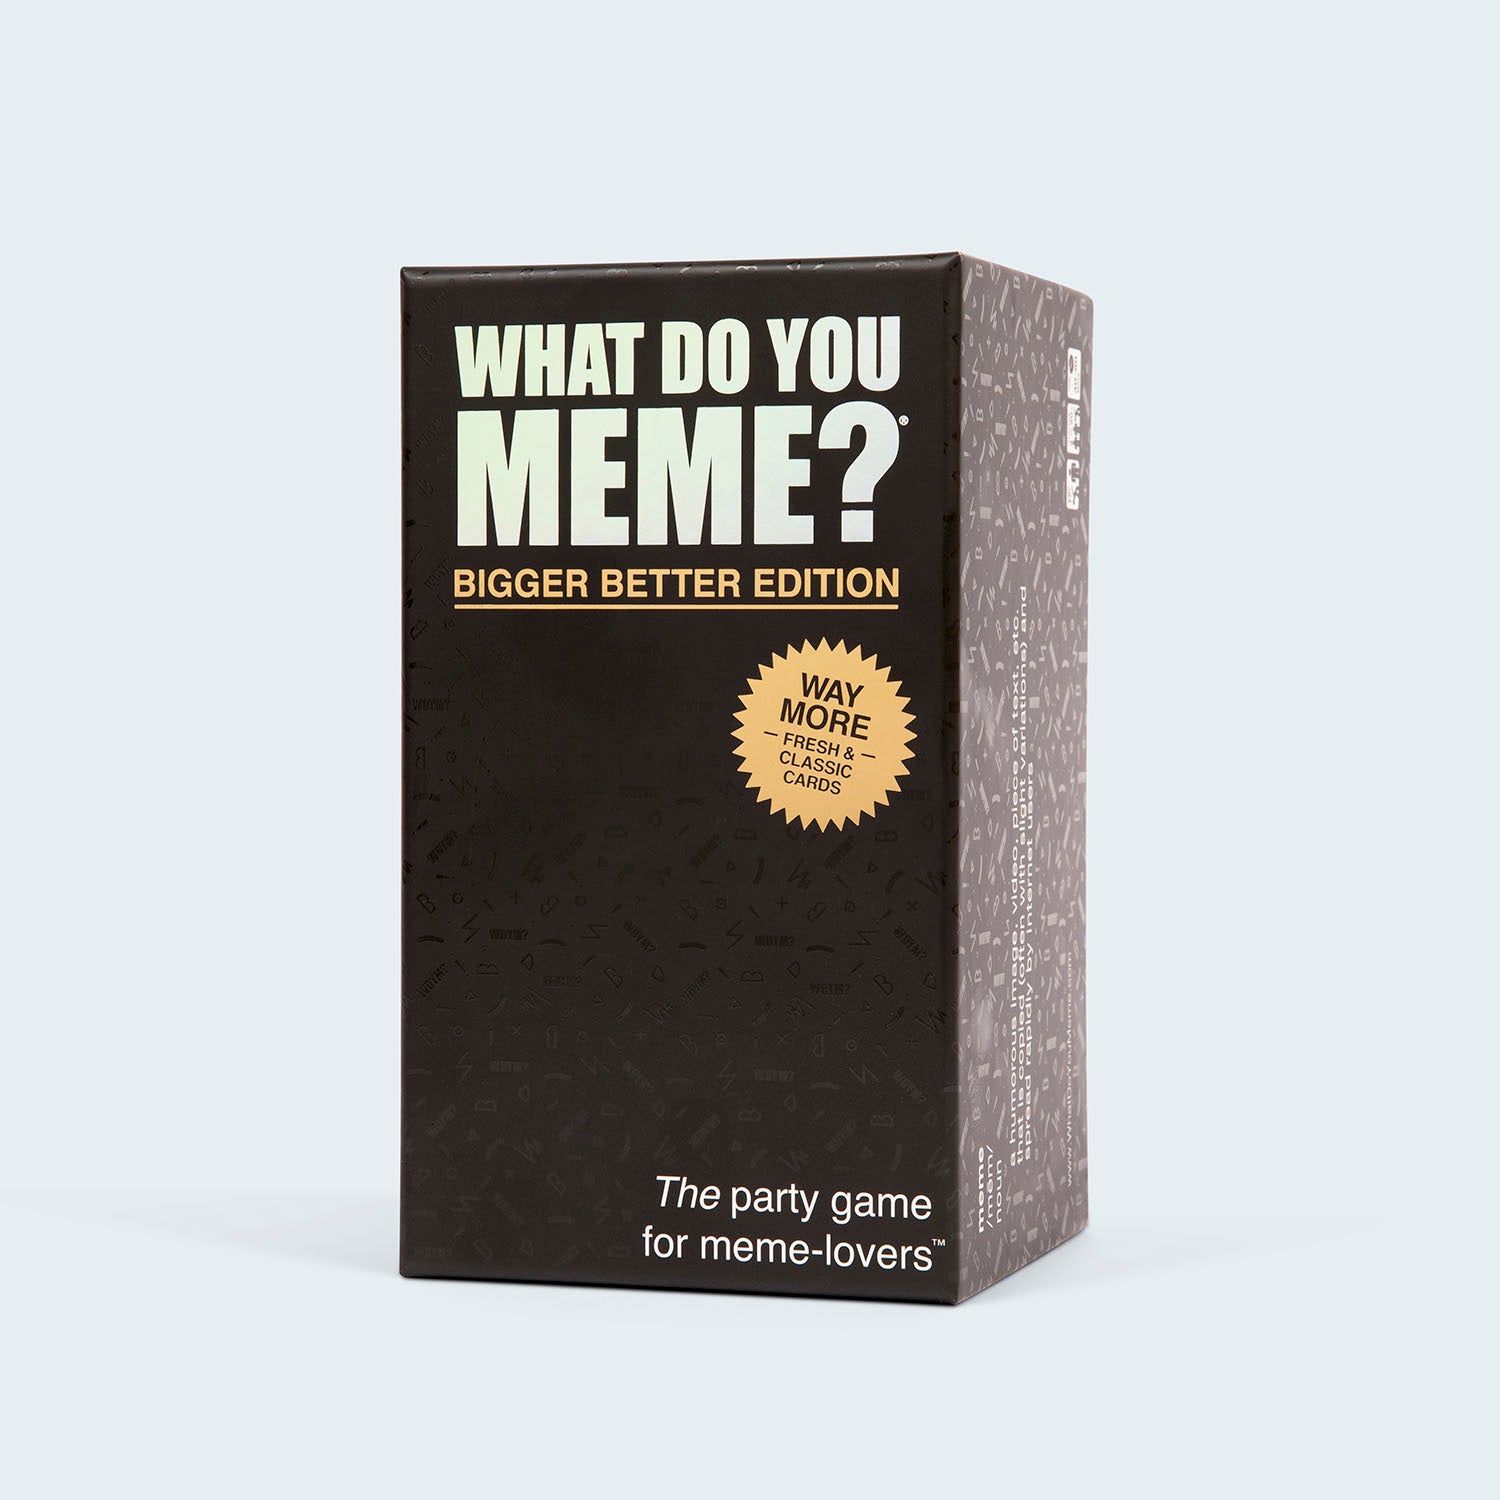 What Do You Meme? Core Game - The Hilarious Adult Party Game for